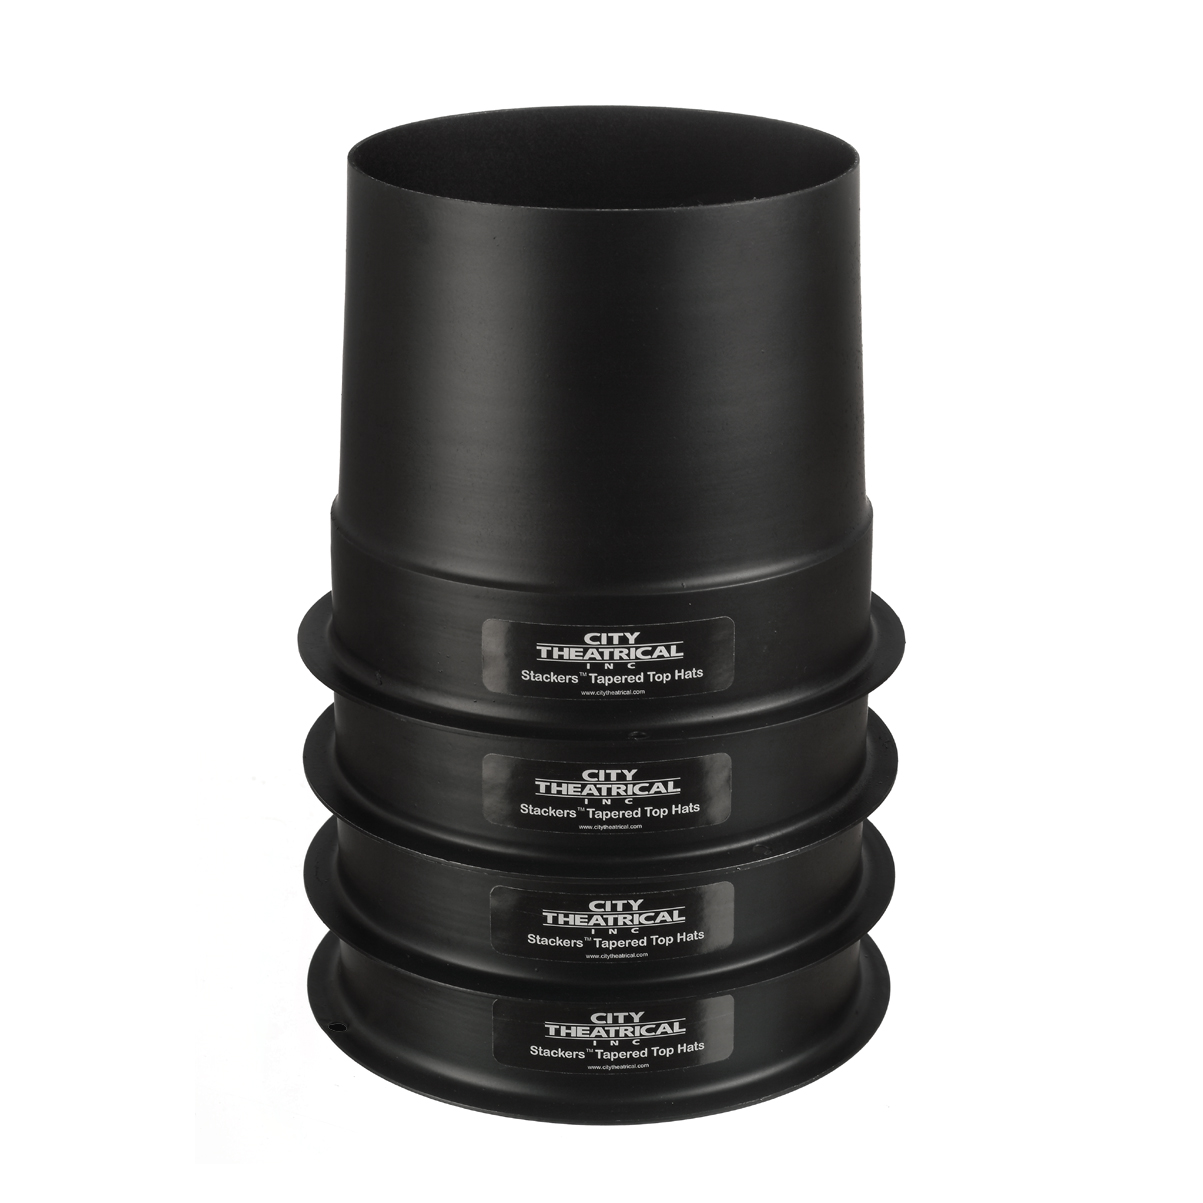 Stackers Tapered Top Hats, Stacked